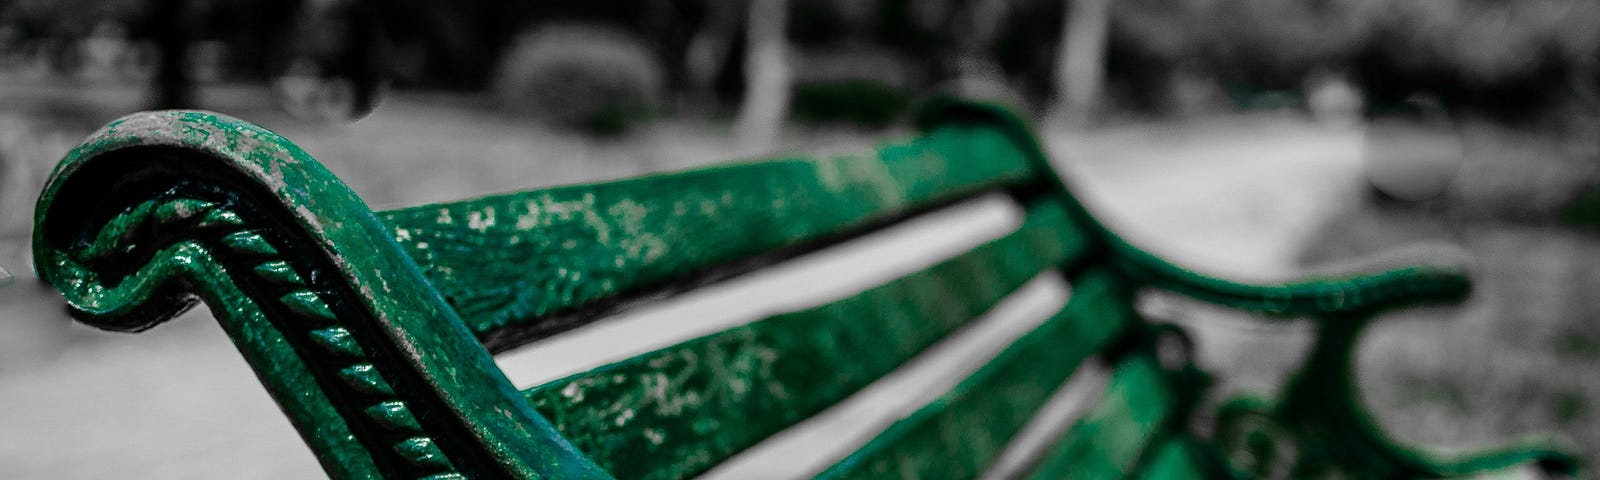 A green metal bench with peeling paint